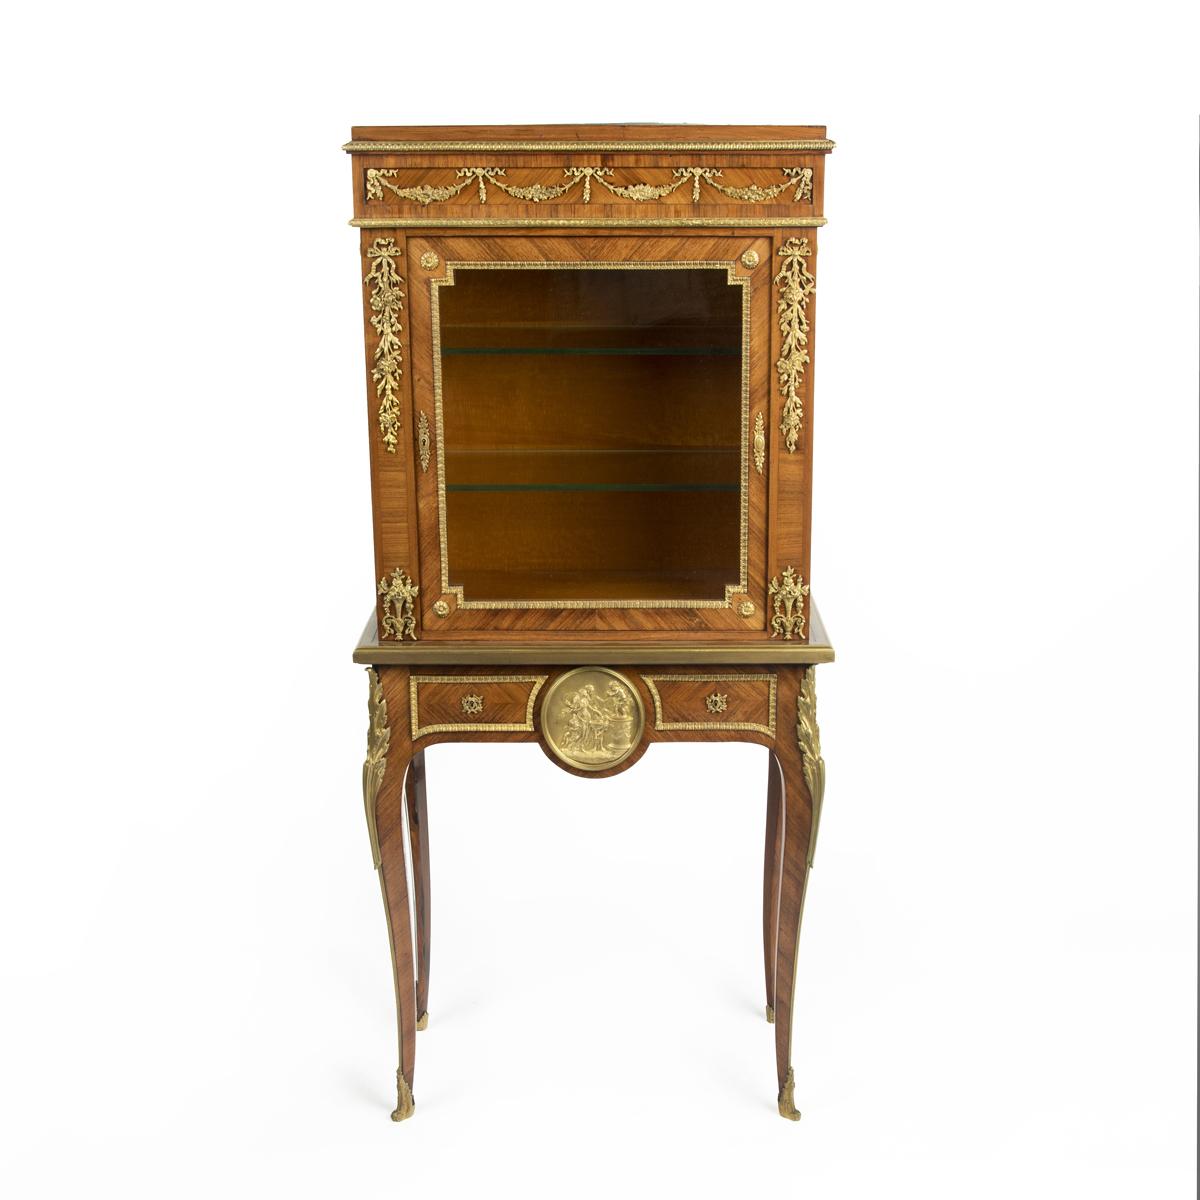 A pair of small Napoleon III kingwood display cabinets on stands